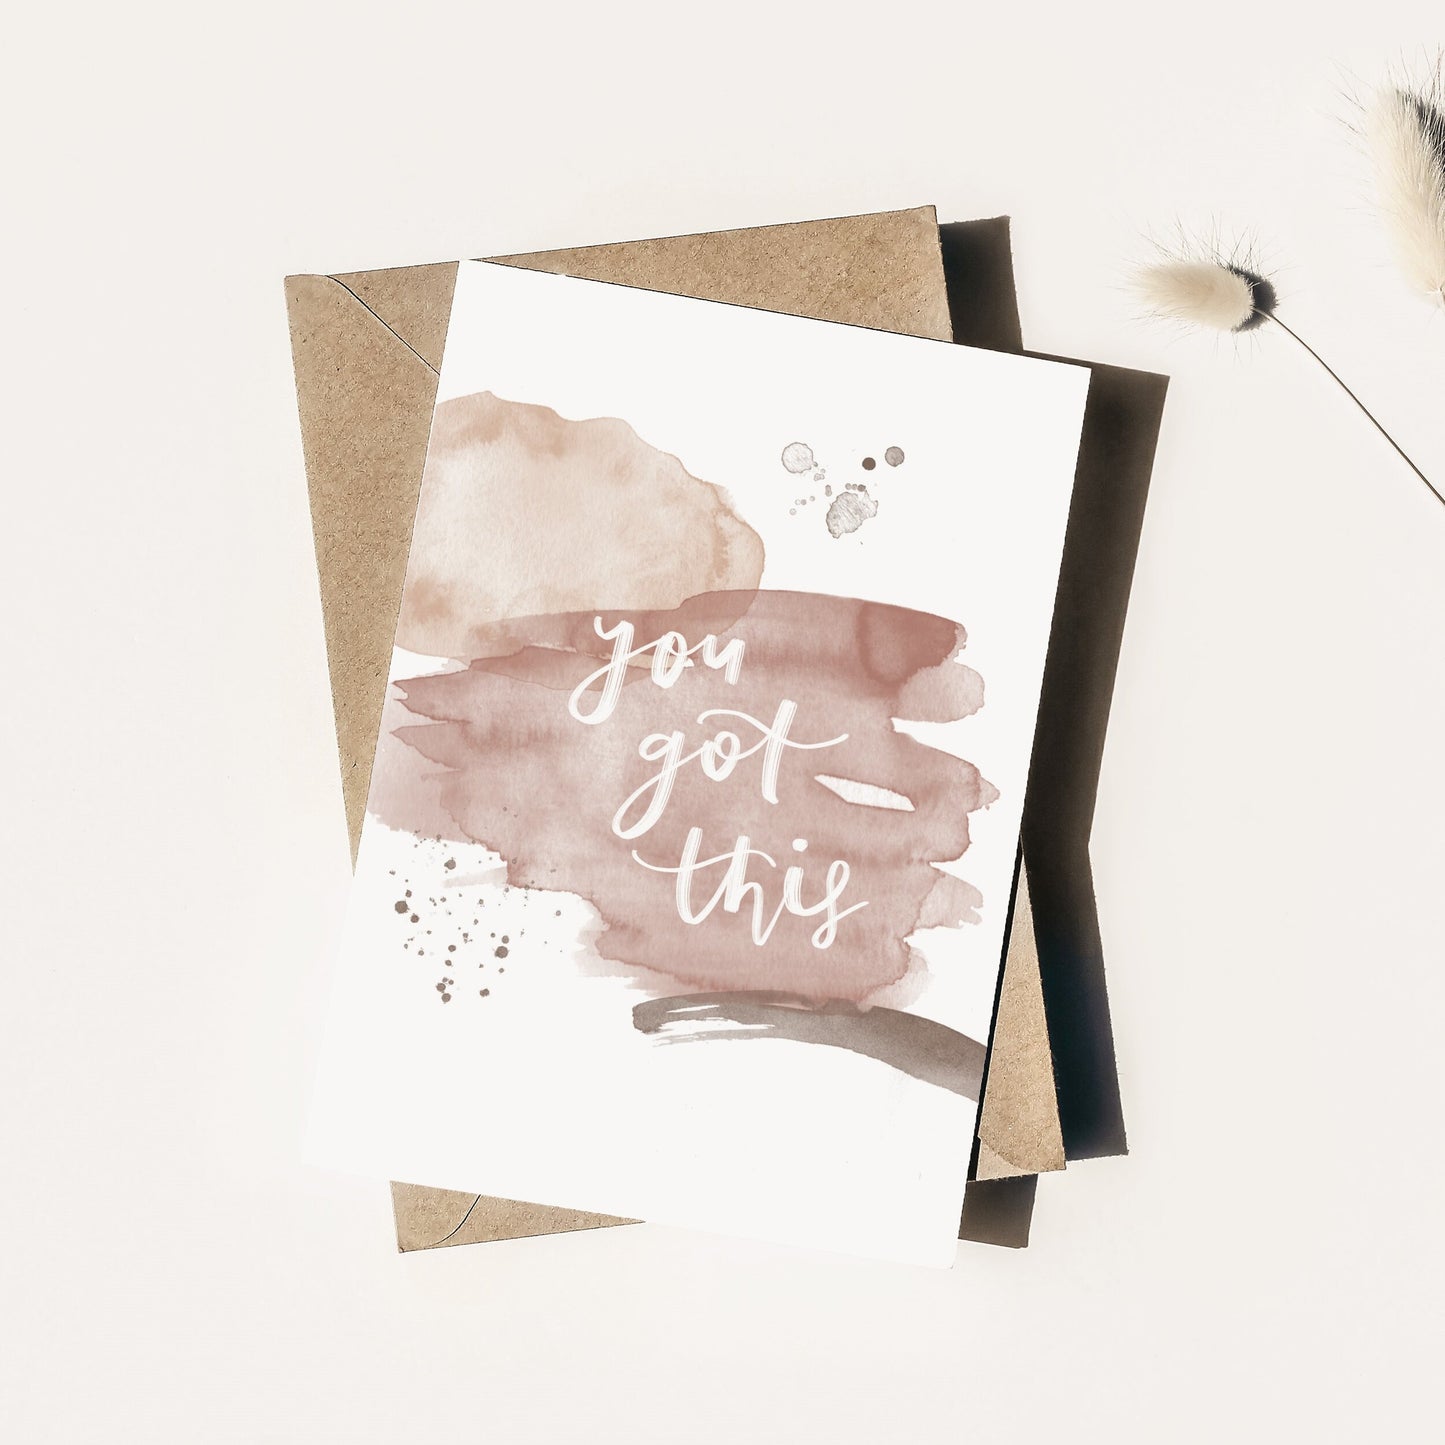 You Got This | Greeting Card